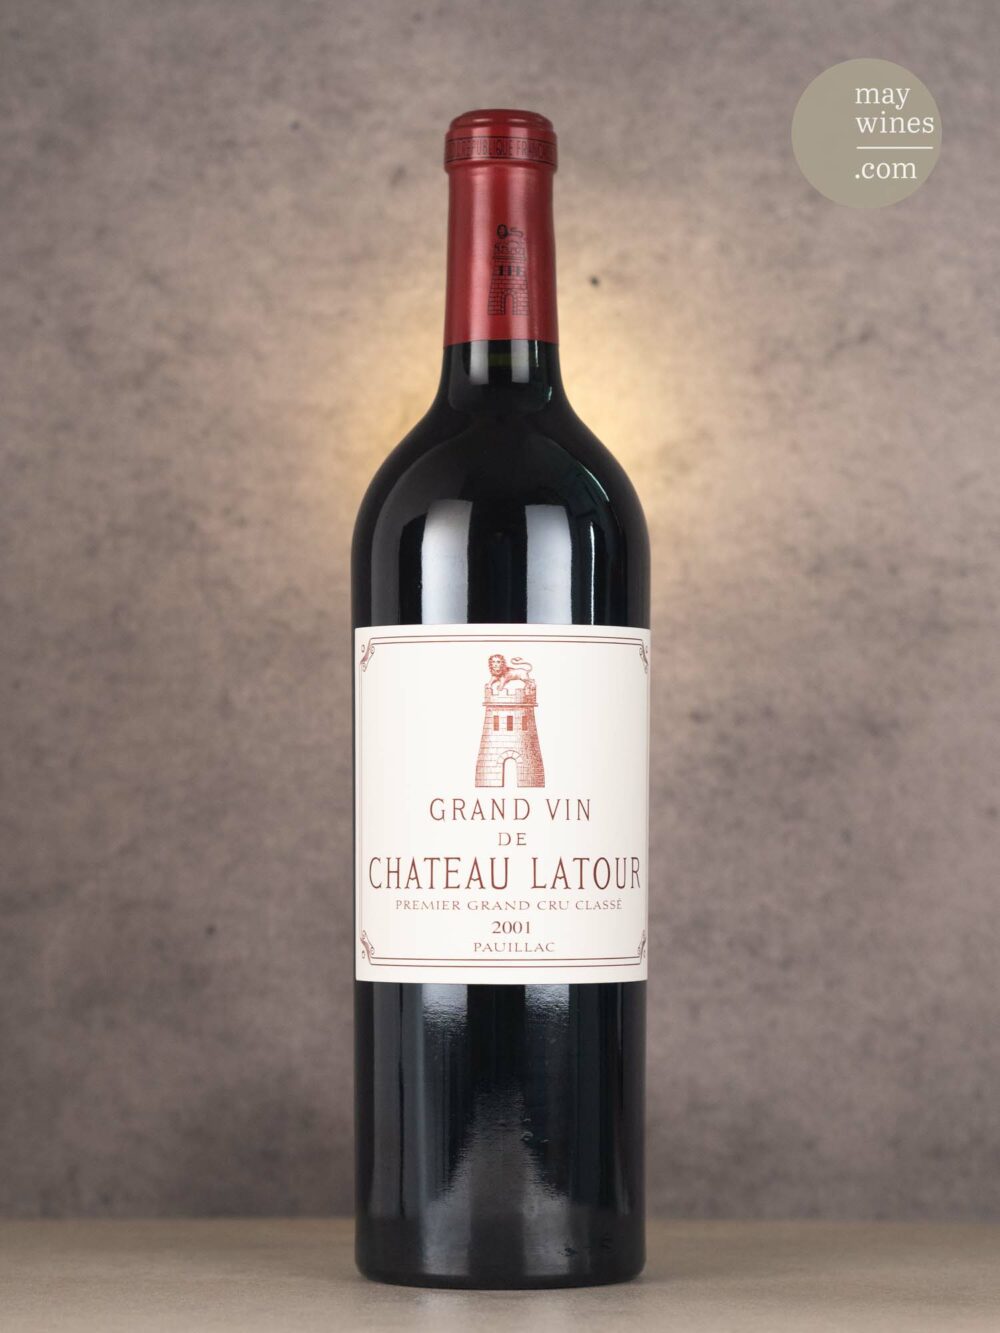 May Wines – Rotwein – 2001 Château Latour